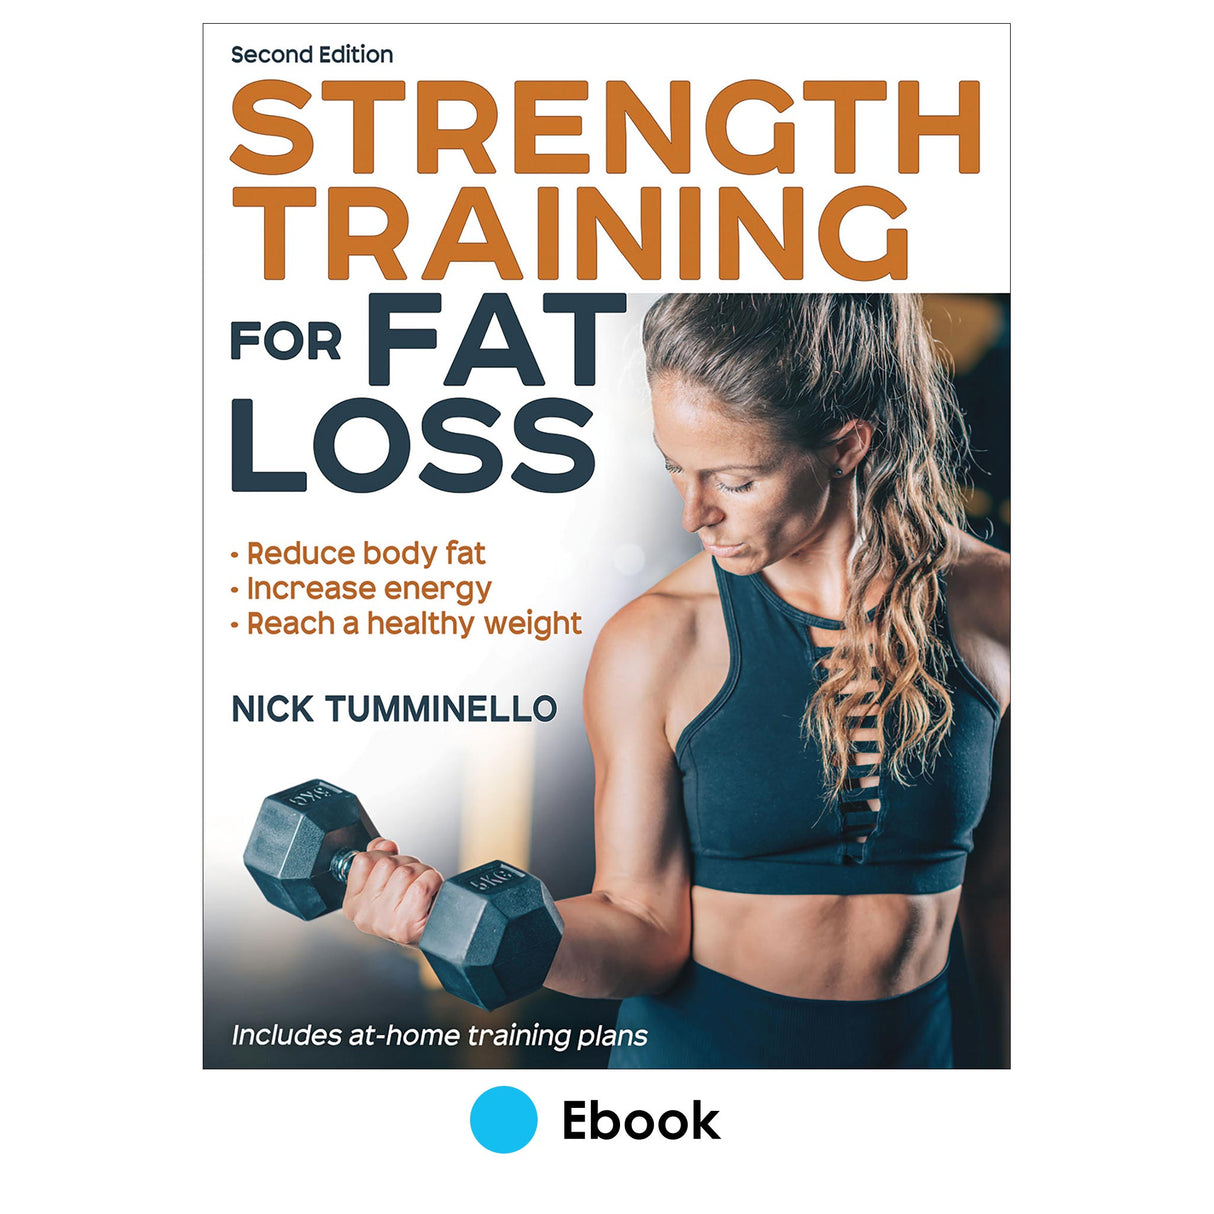 Strength Training for Fat Loss 2nd Edition epub